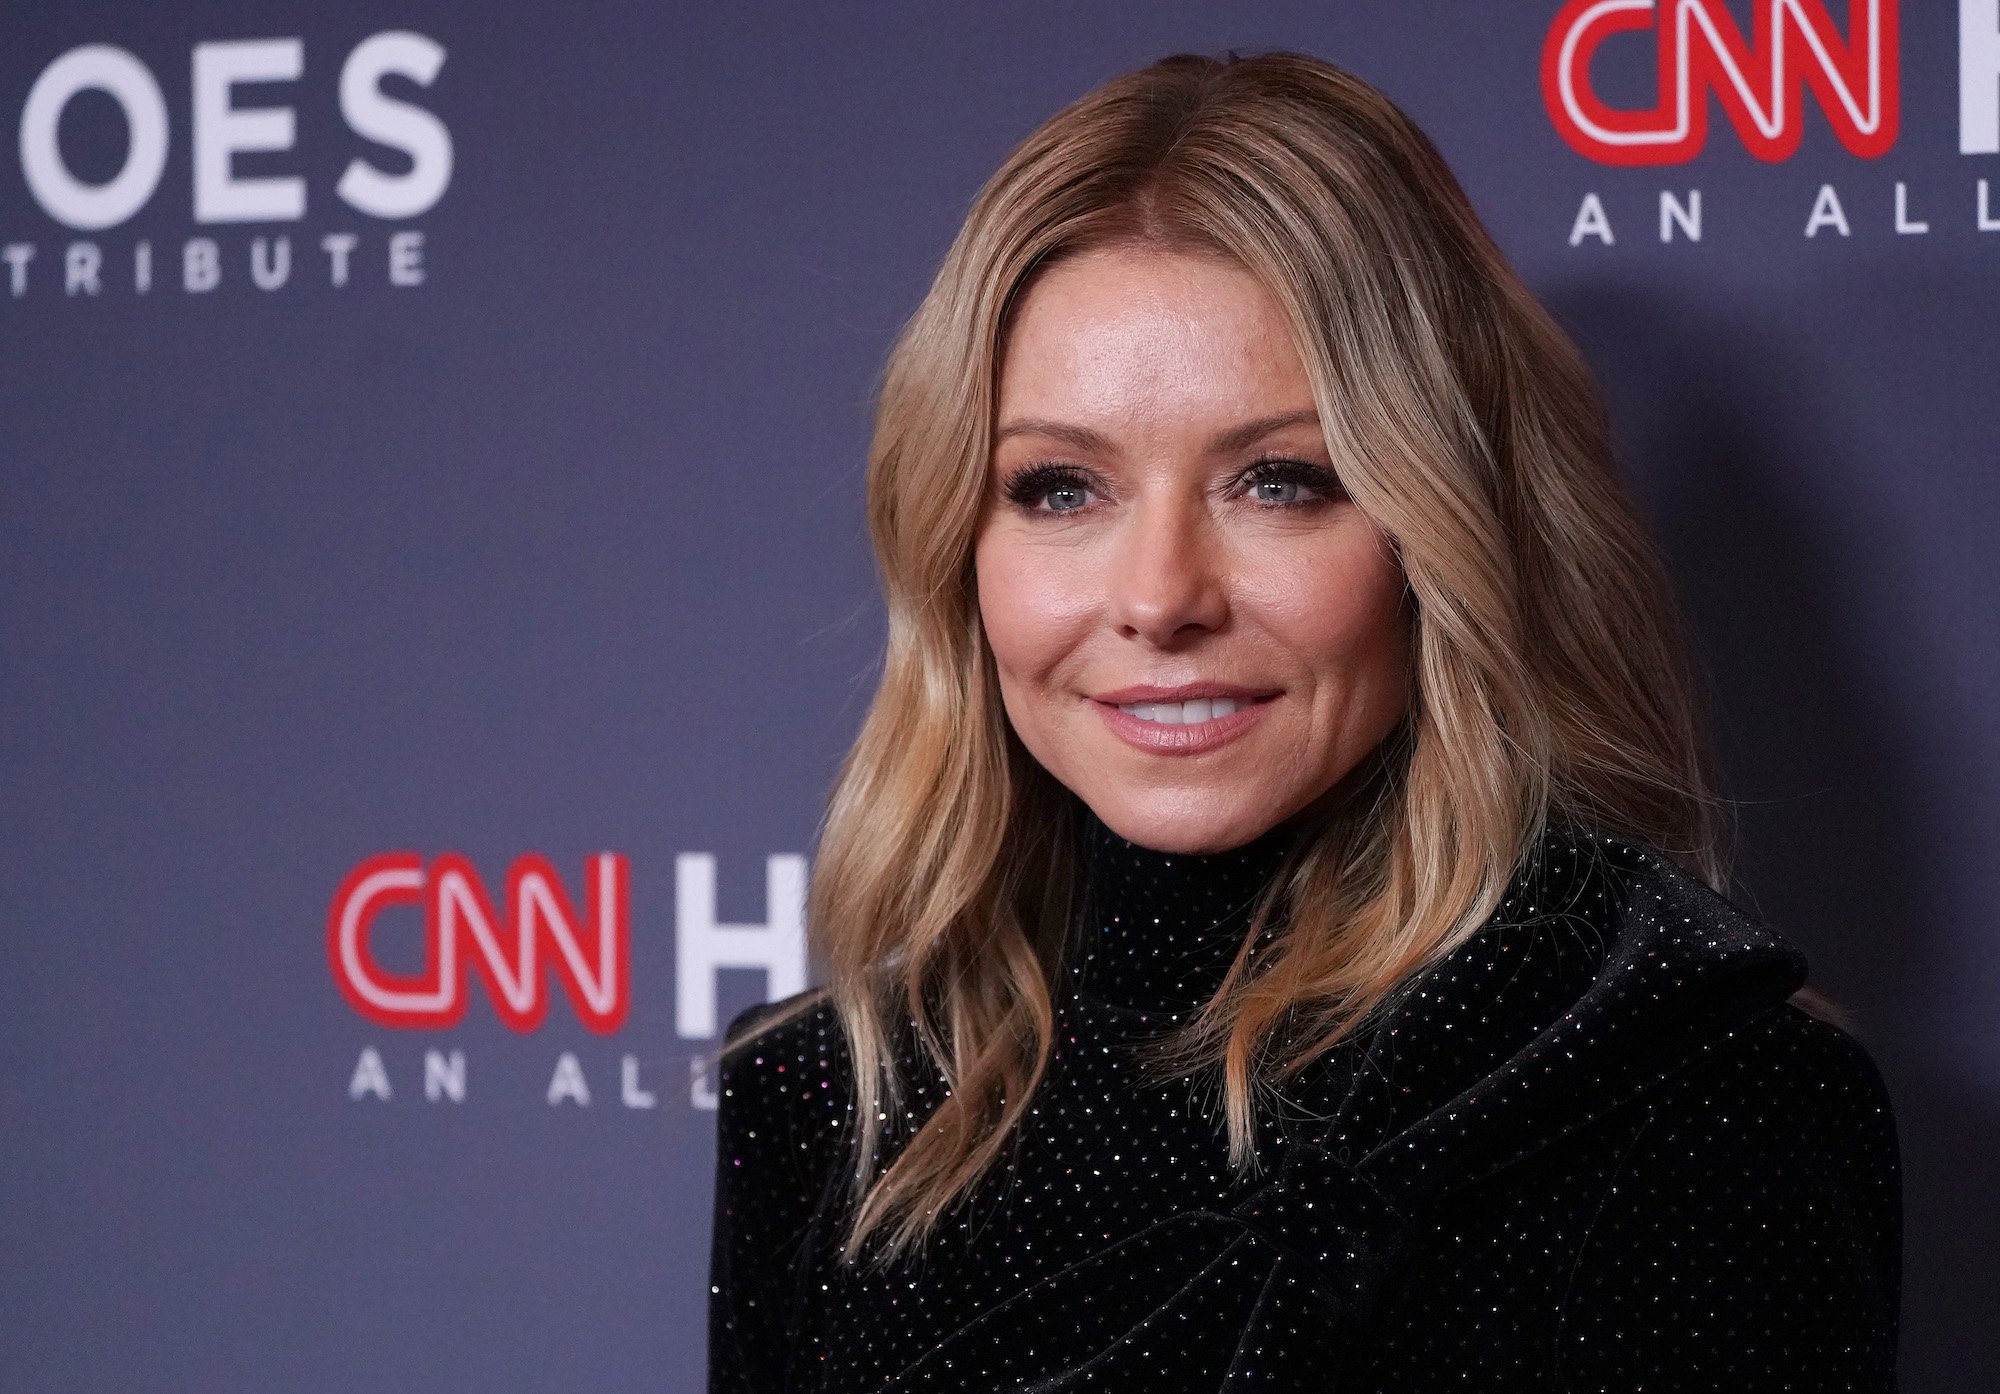 Kelly Ripa smiling in front of a blue background